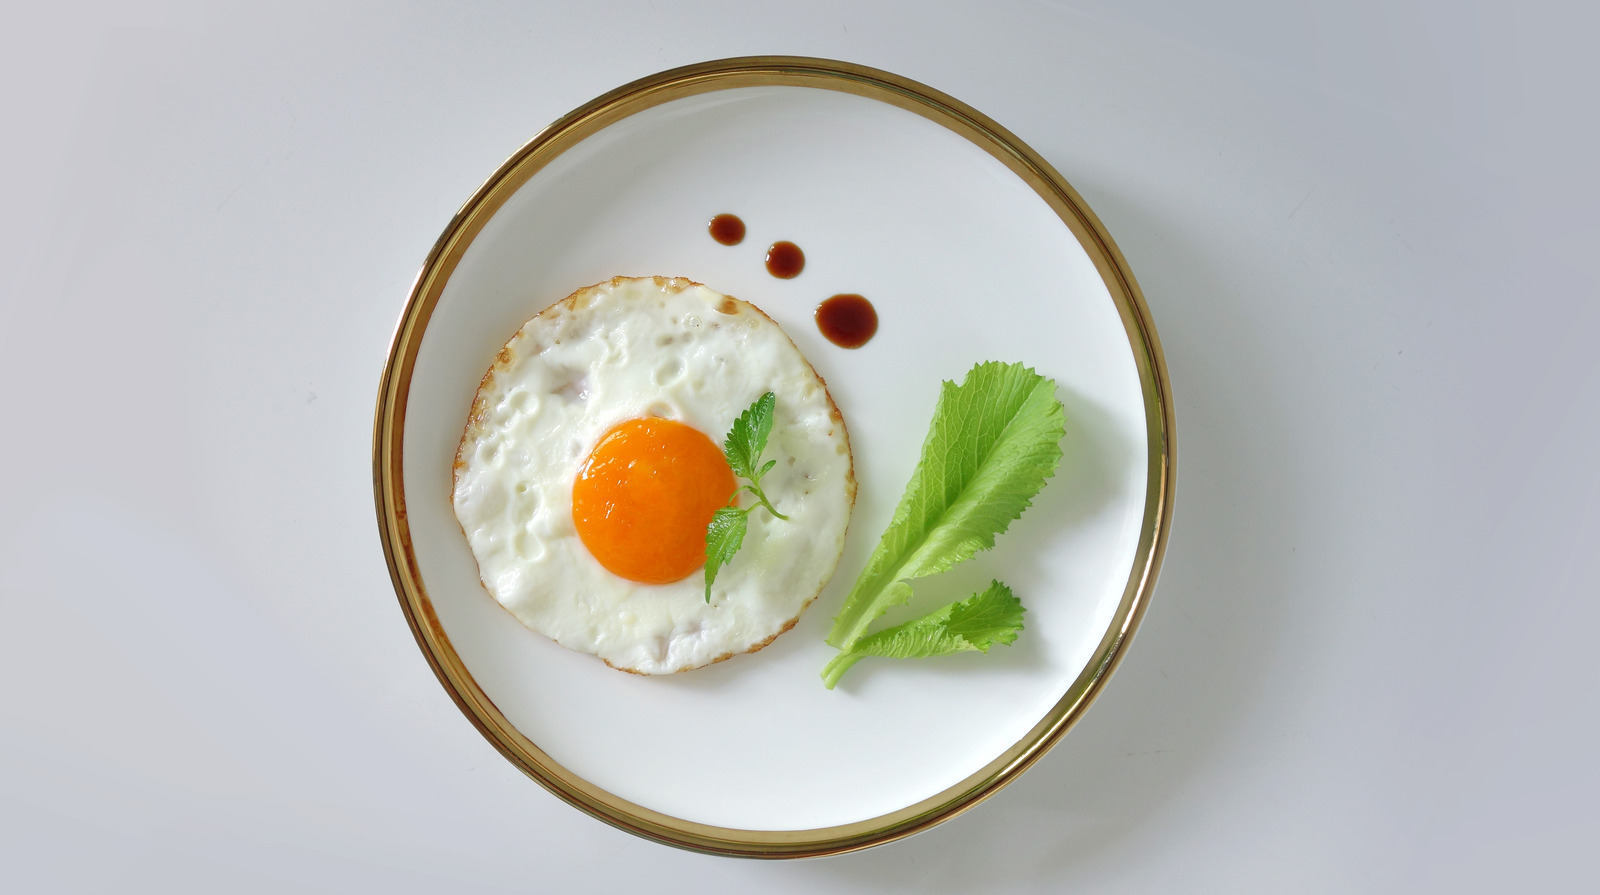 Upgrade Sunny-Side Up Eggs By Deglazing Your Pan